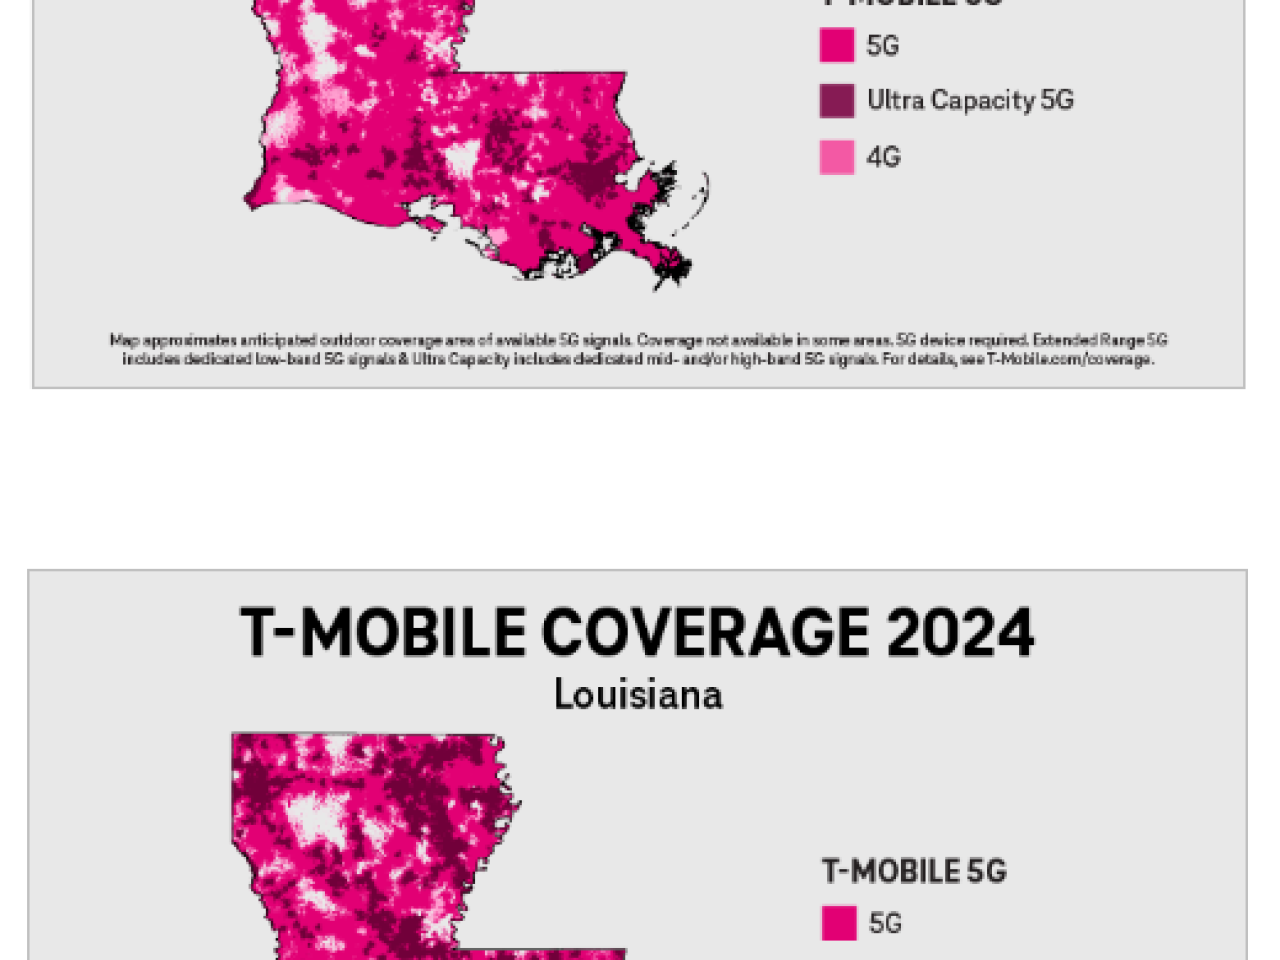 Side by side maps "T-Mobile coverage 2021 and 2024" in Louisiana. Different colors representing different coverage levels.